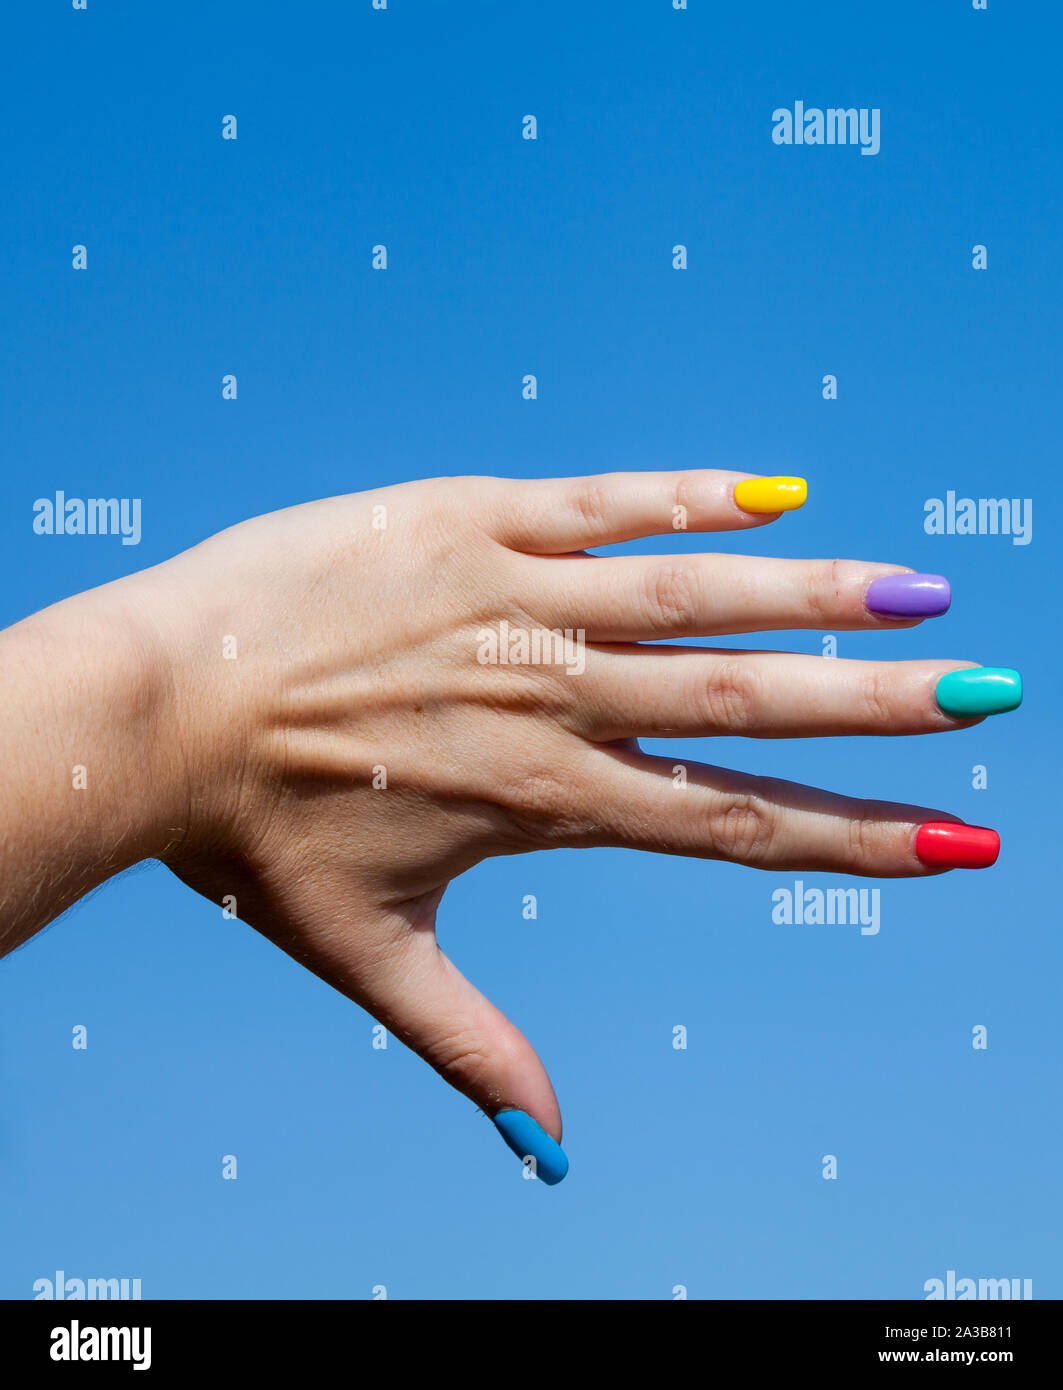 937 Painted Fingernails Stock Photos - Free & Royalty-Free Stock Photos  from Dreamstime